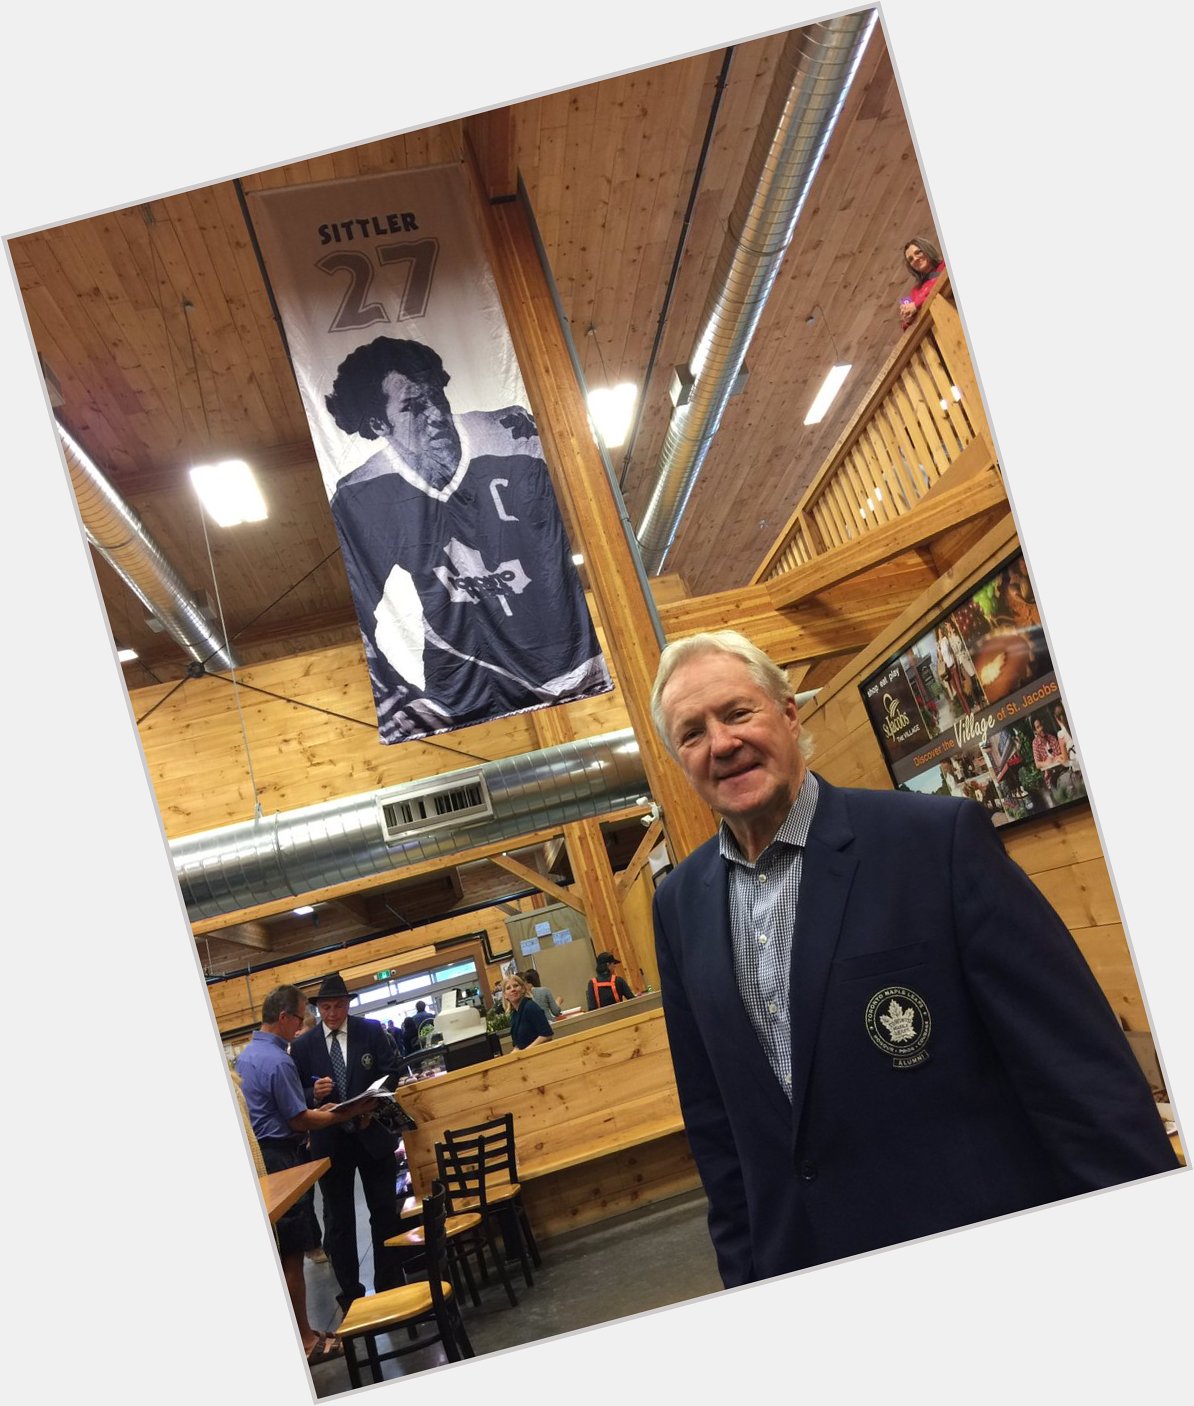 The would like to wish Darryl Sittler a Happy 70th Birthday.  